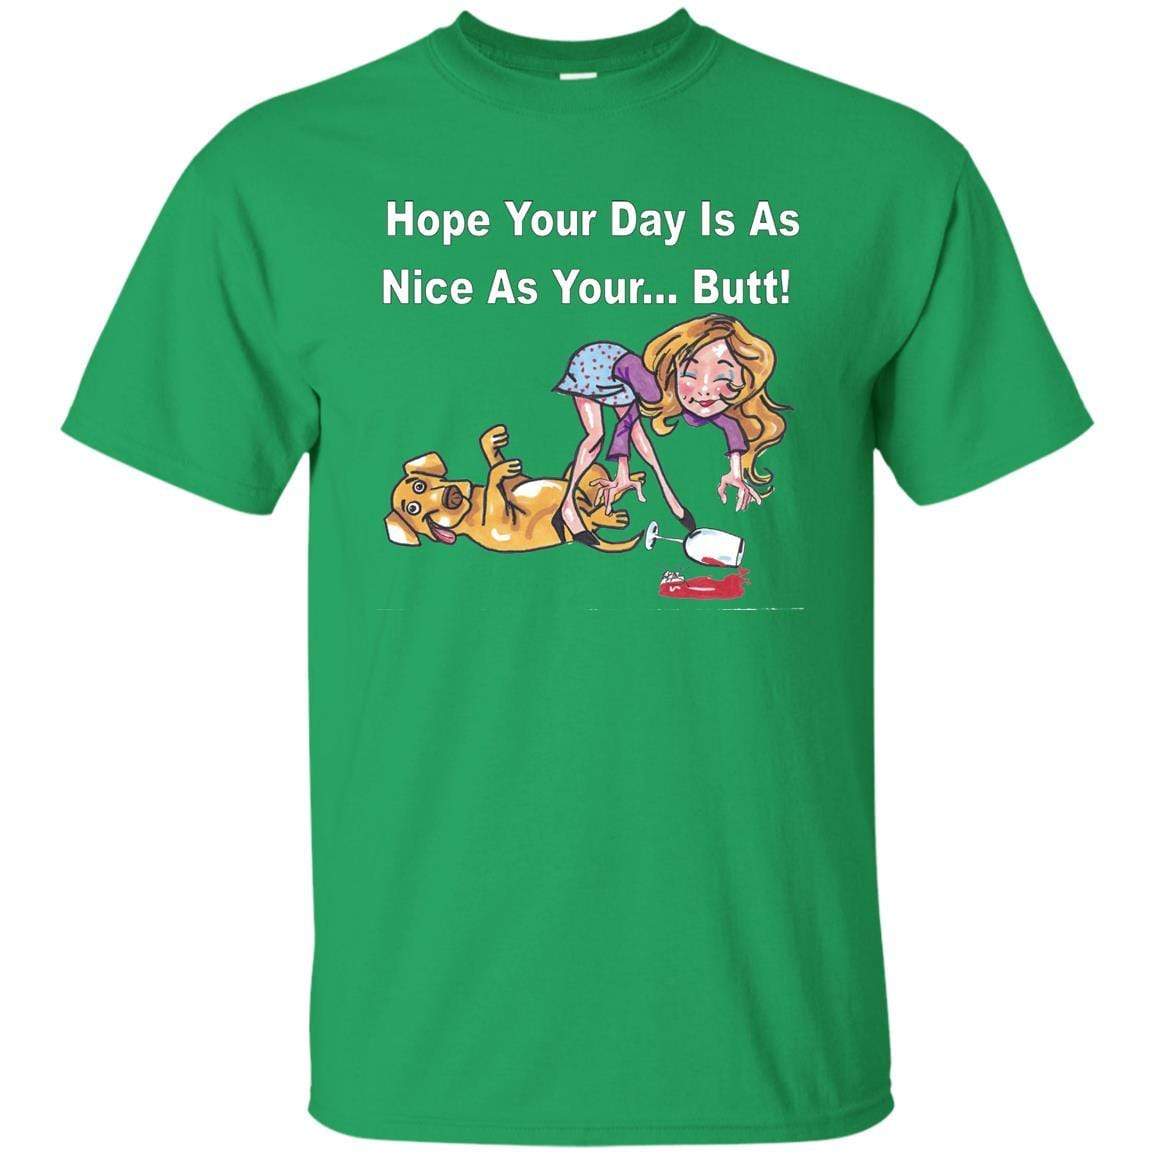 T-Shirts Irish Green / S WineyBitches.co "Hope Your Day Is As Nice As Your...Butt" White Lettering Ultra Cotton T-Shirt WineyBitchesCo